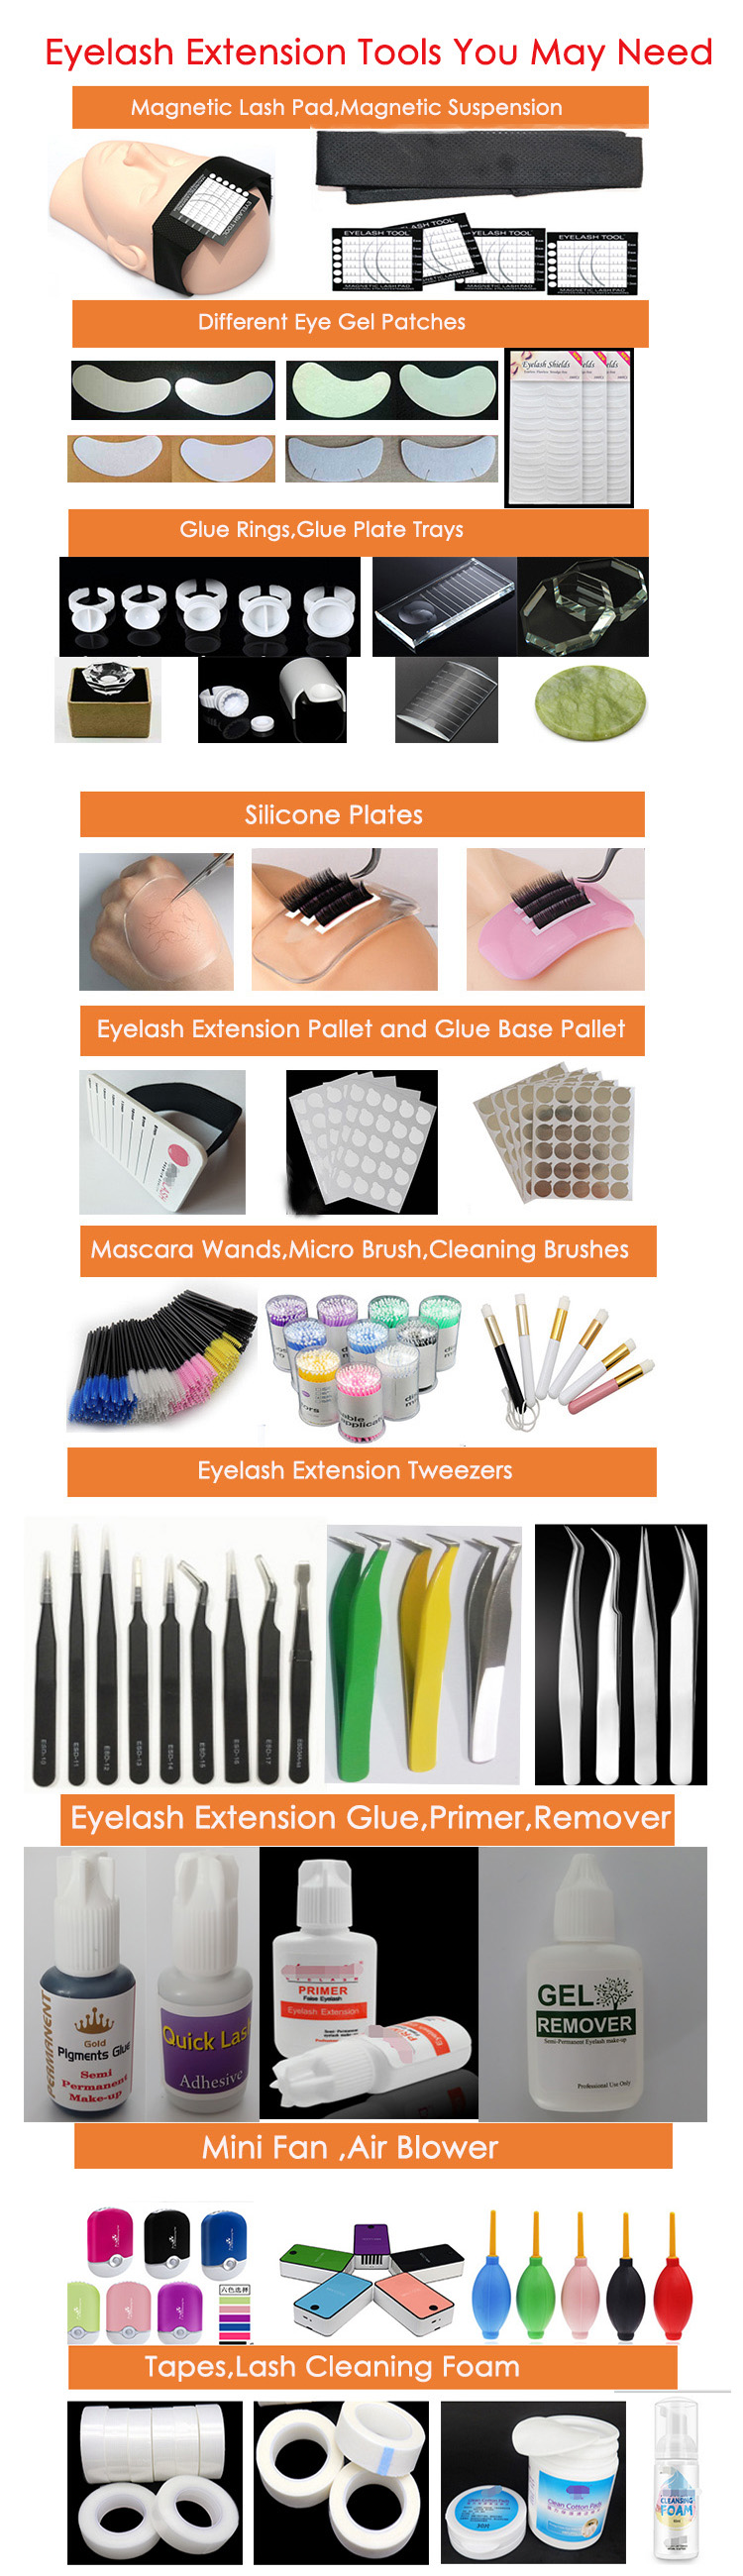 eyelash extensions accessories products wholesale private label.jpg